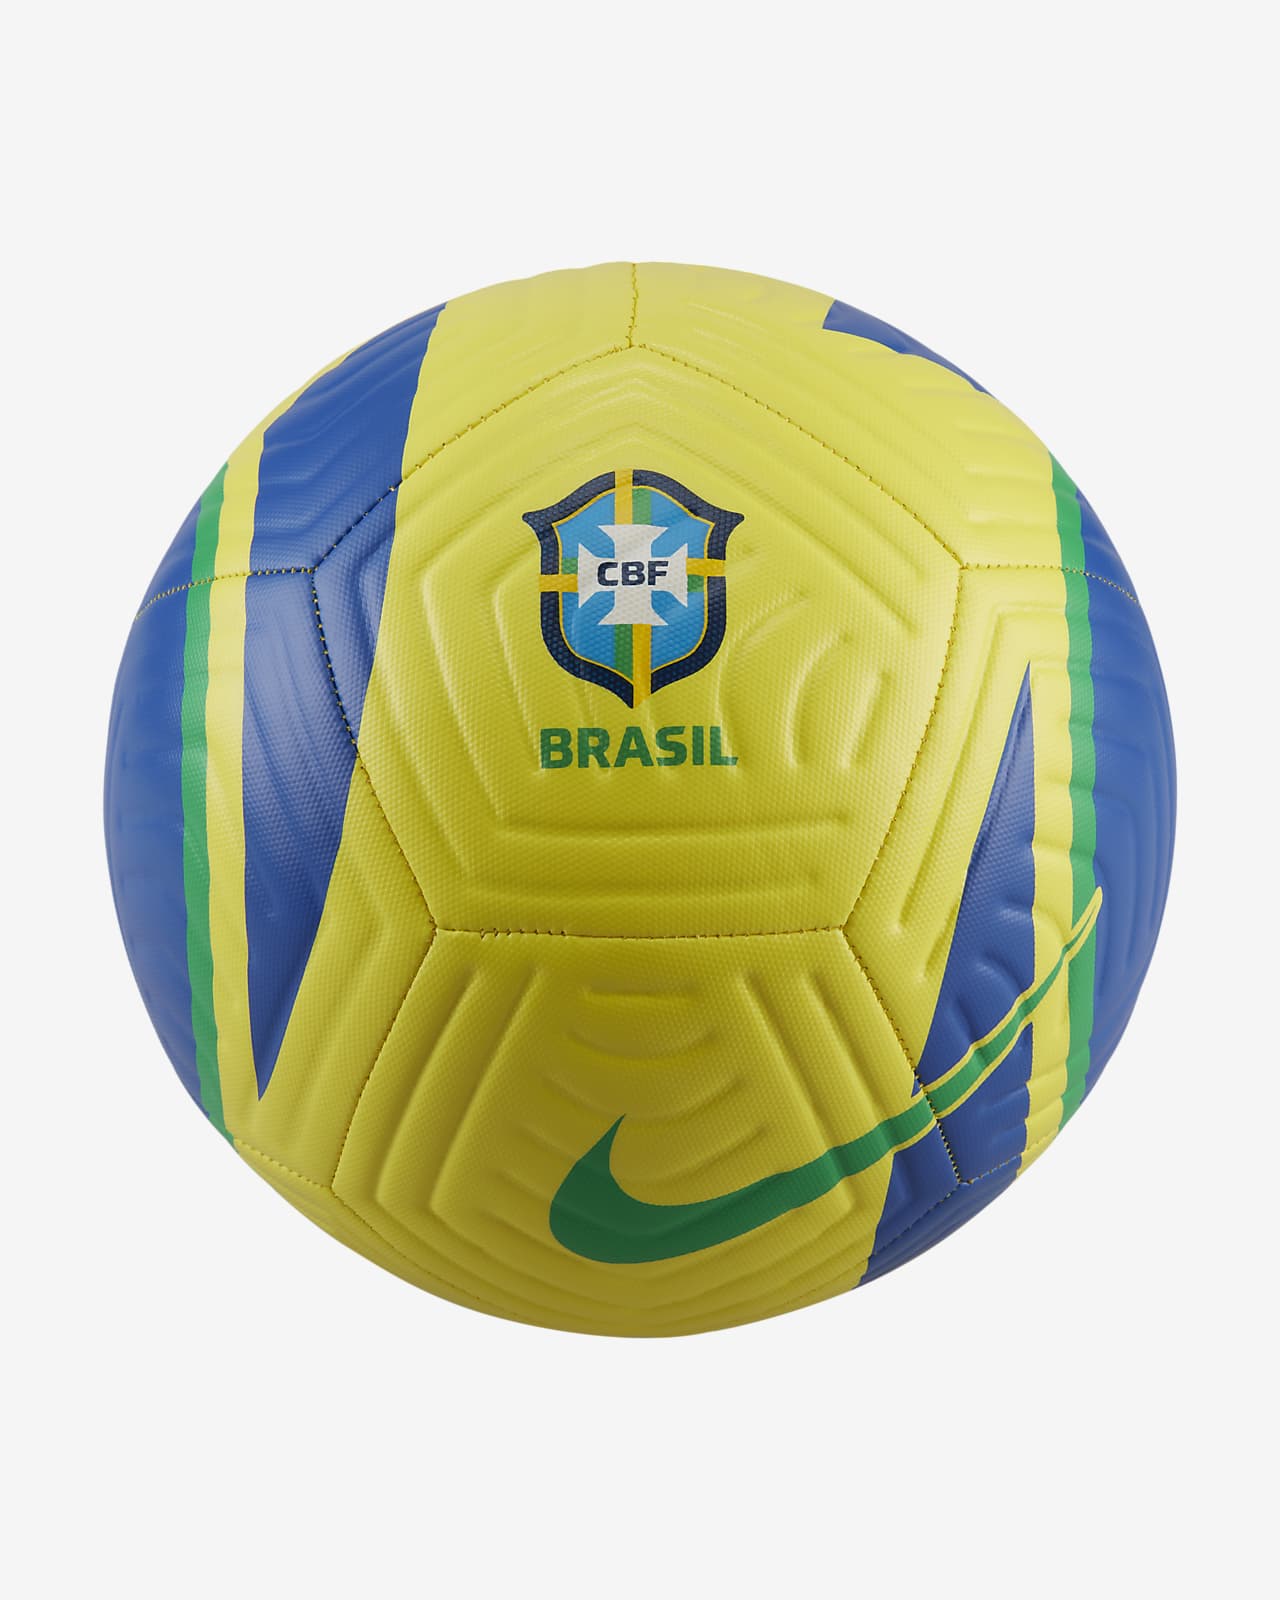 What's So Great About The Brazuca Ball?